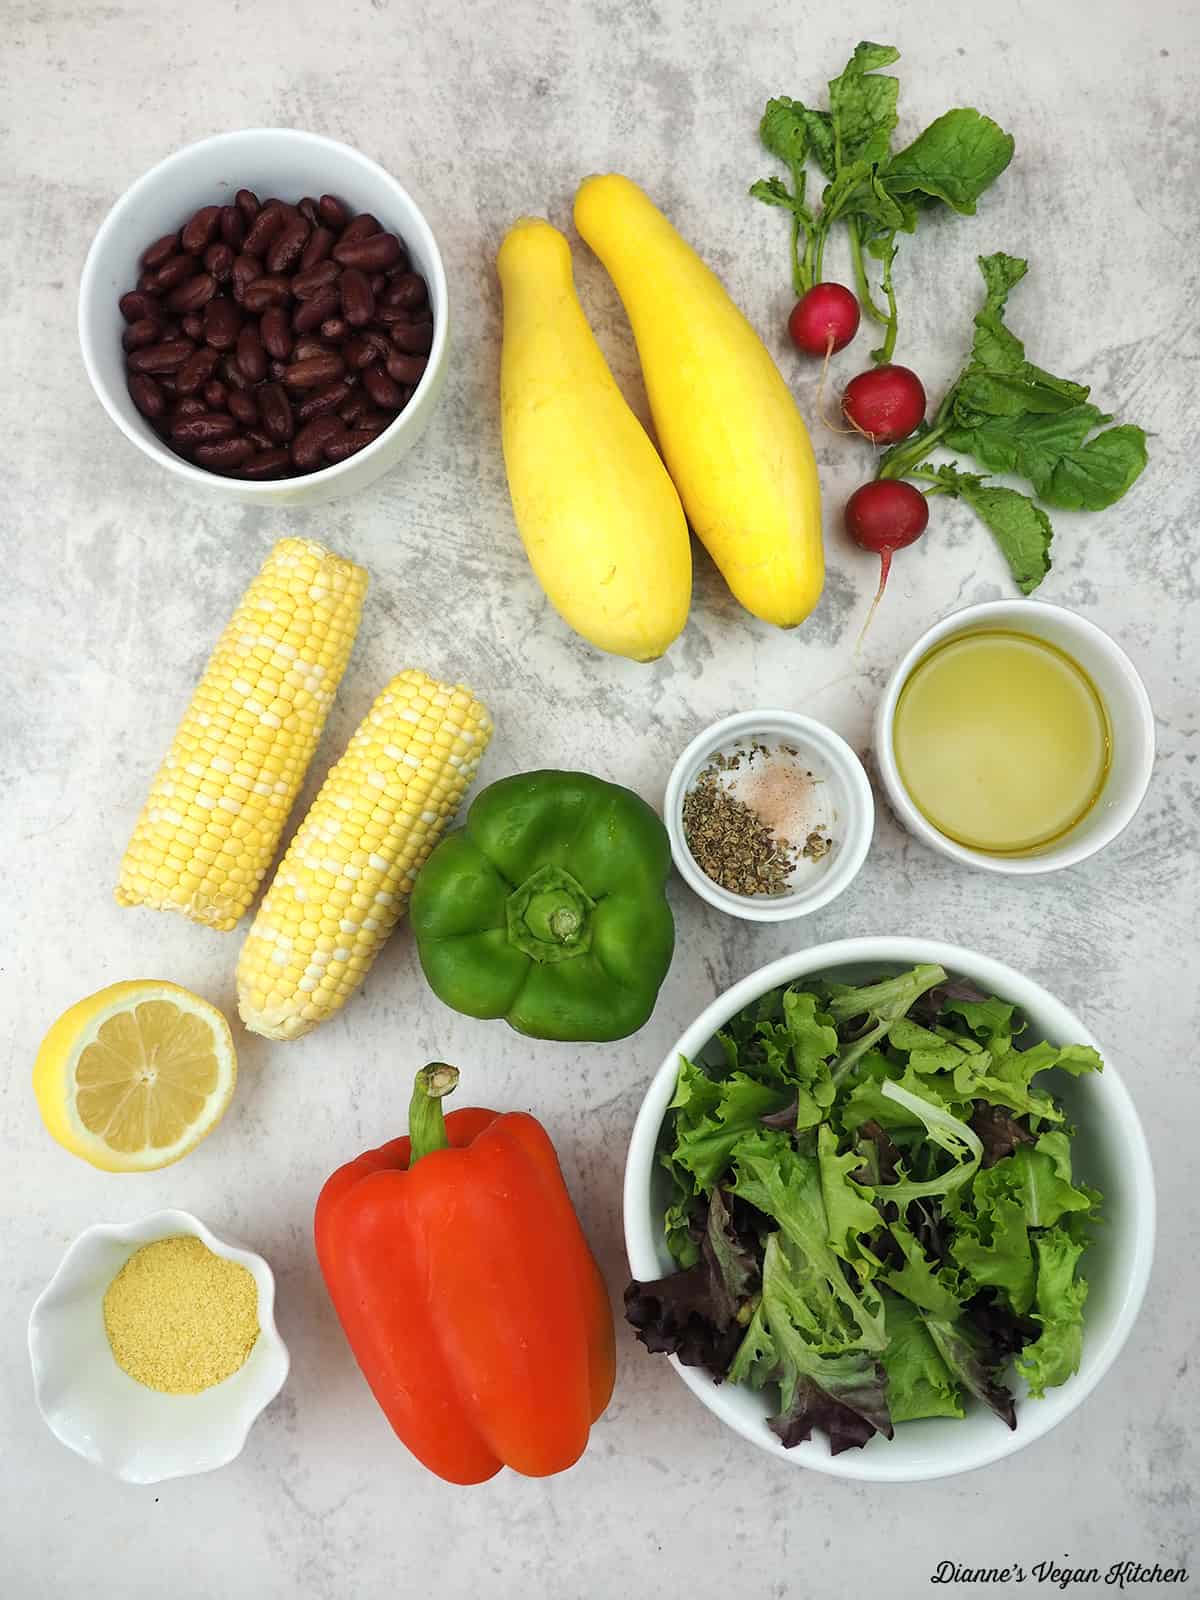 kidney beans, summer squash, radishes, corn on the cob, bell peppers, spices, nutritional yeast, lemon, olive oil, greens